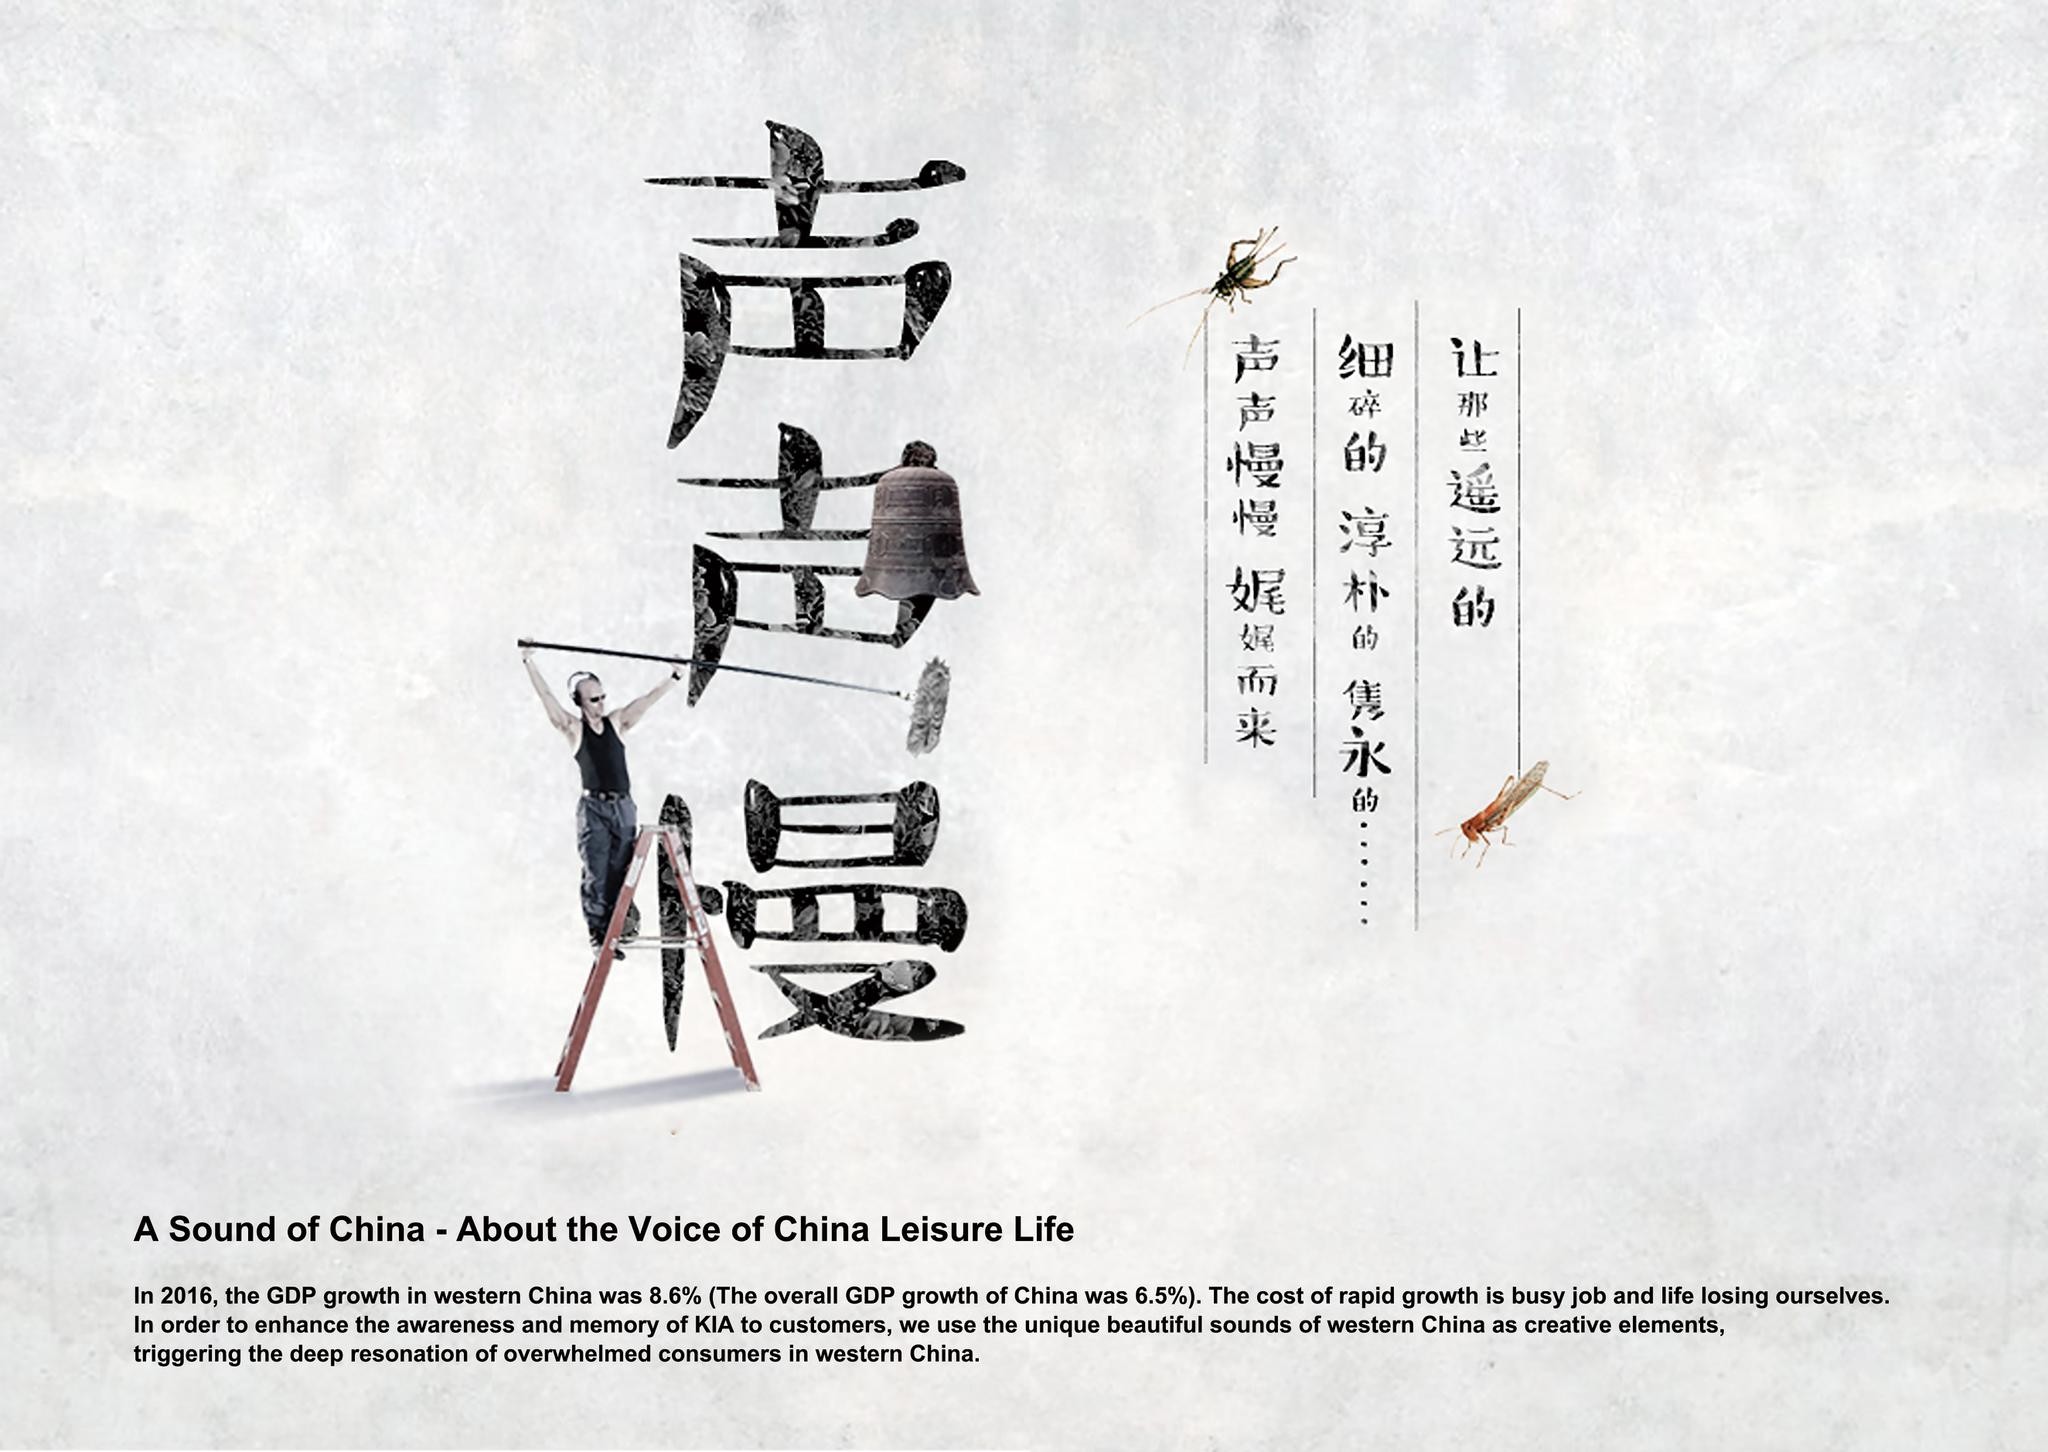 A Sound of China - About the Voice of China Leisure Life